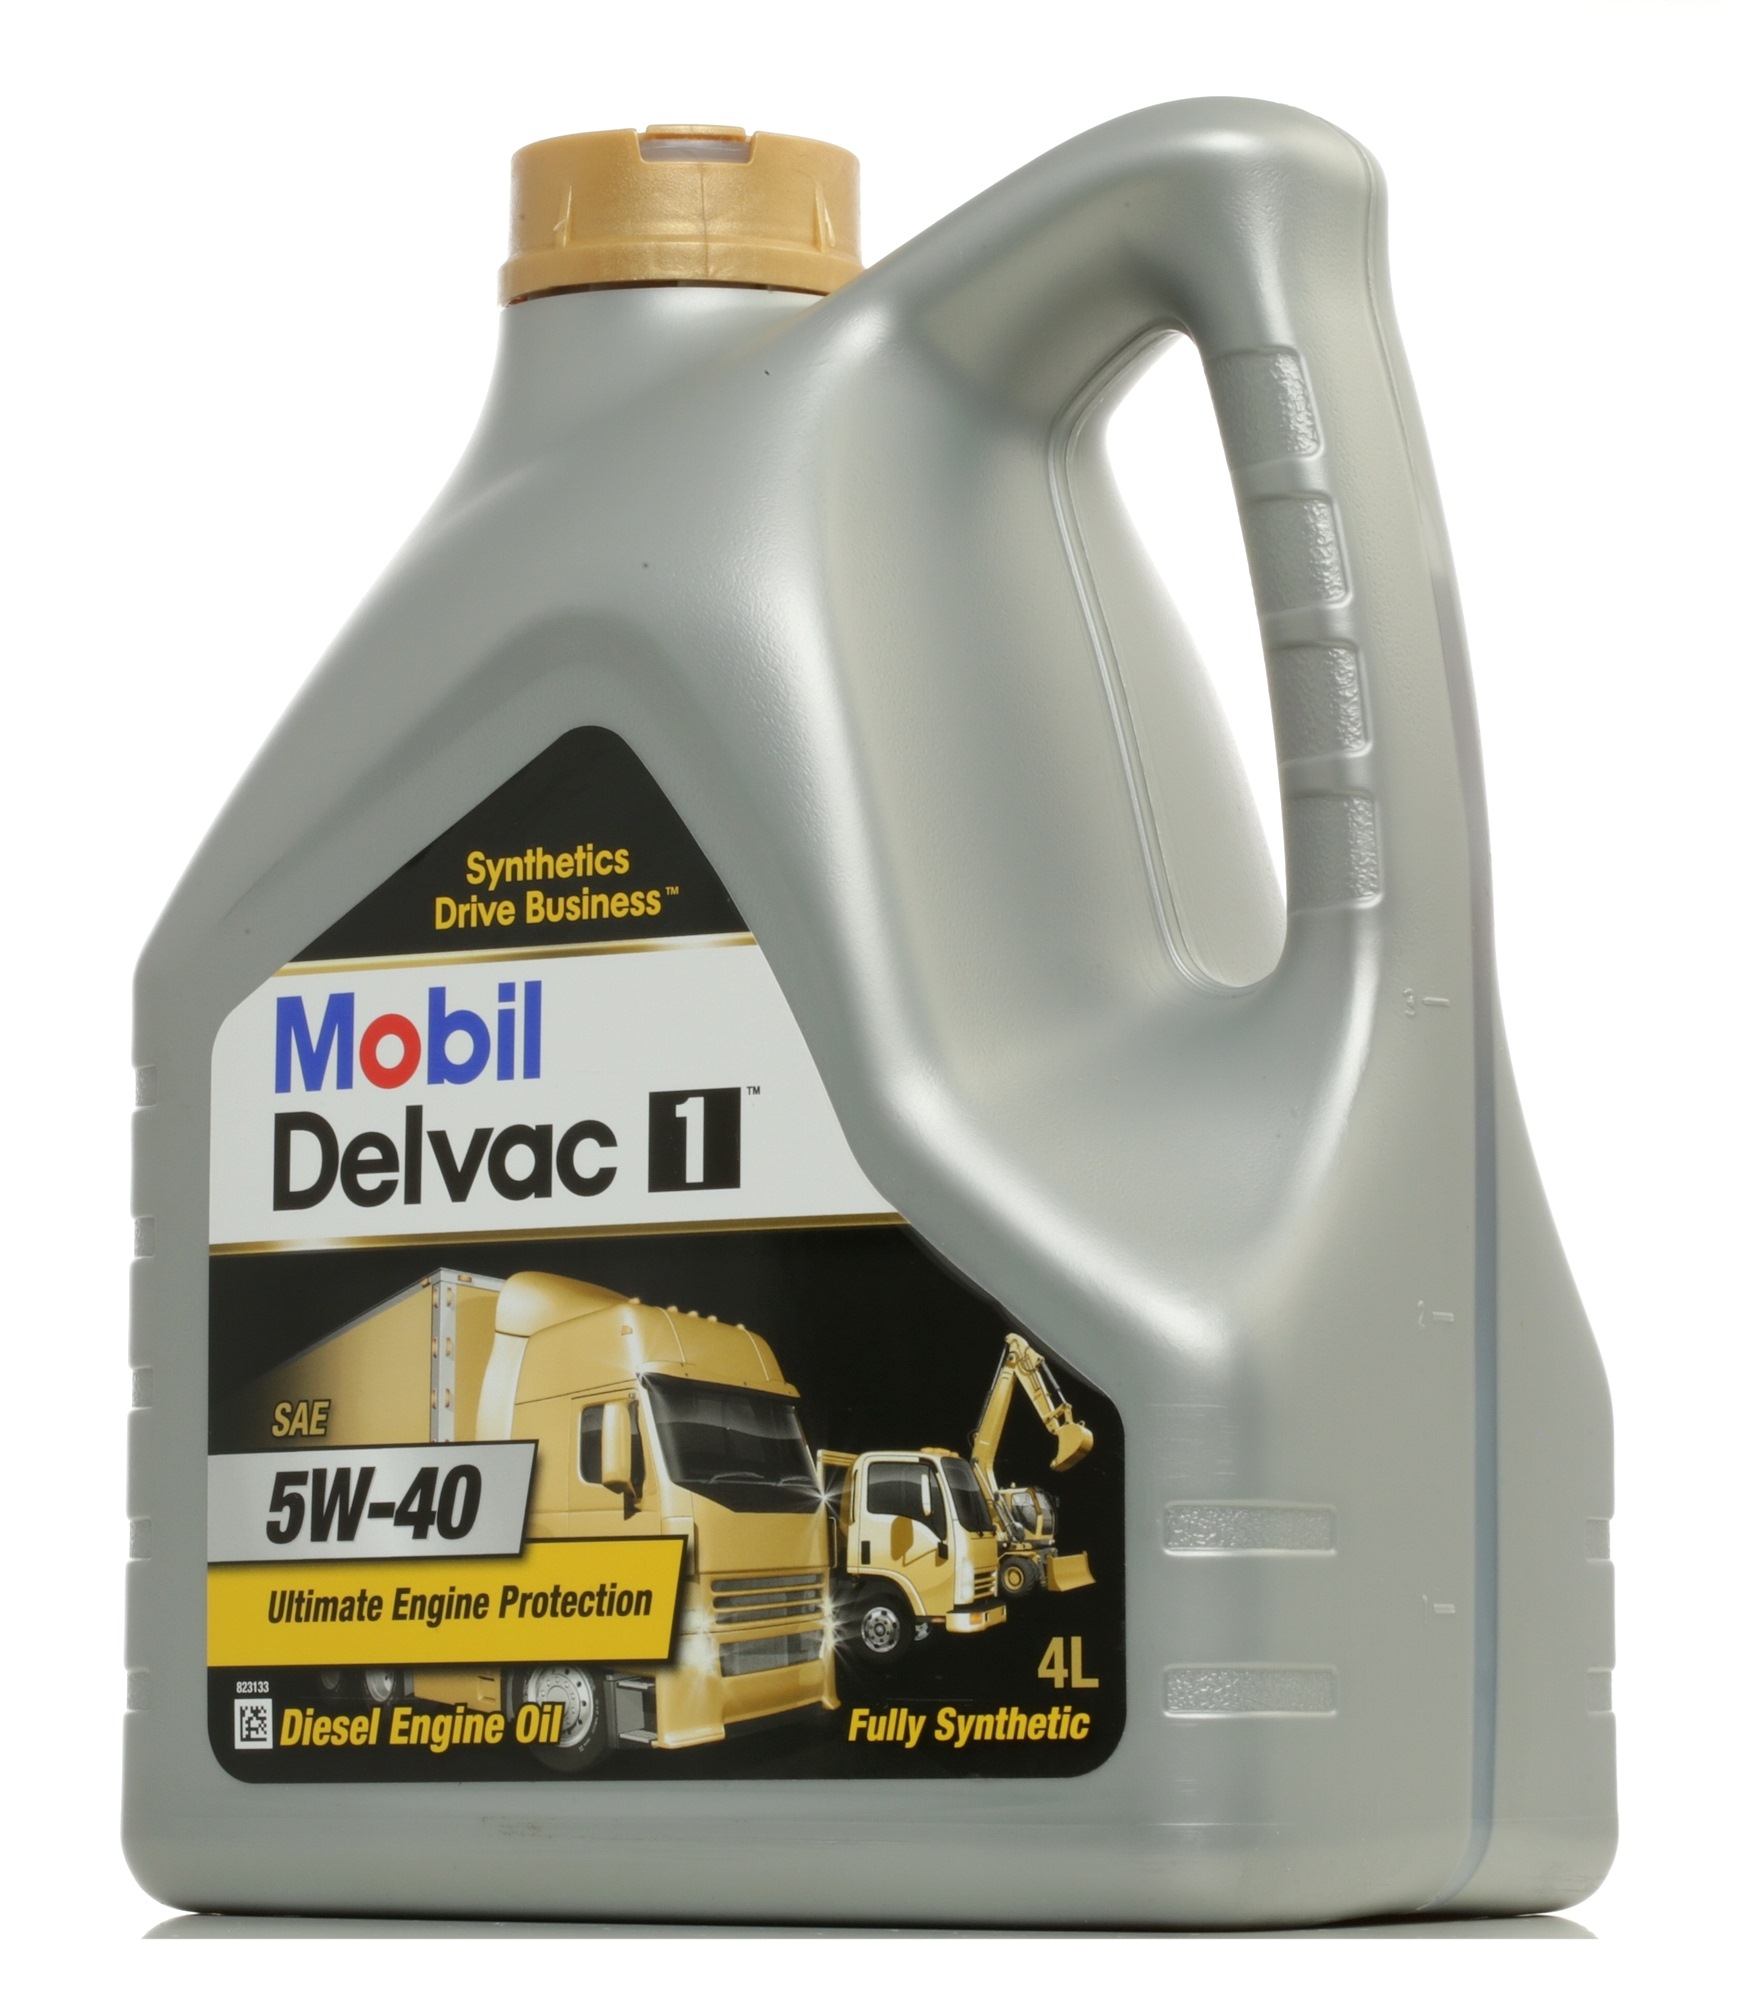 MOBIL Delvac 1 148368 Olie 5W-40, 4L, Volledig synthetisch